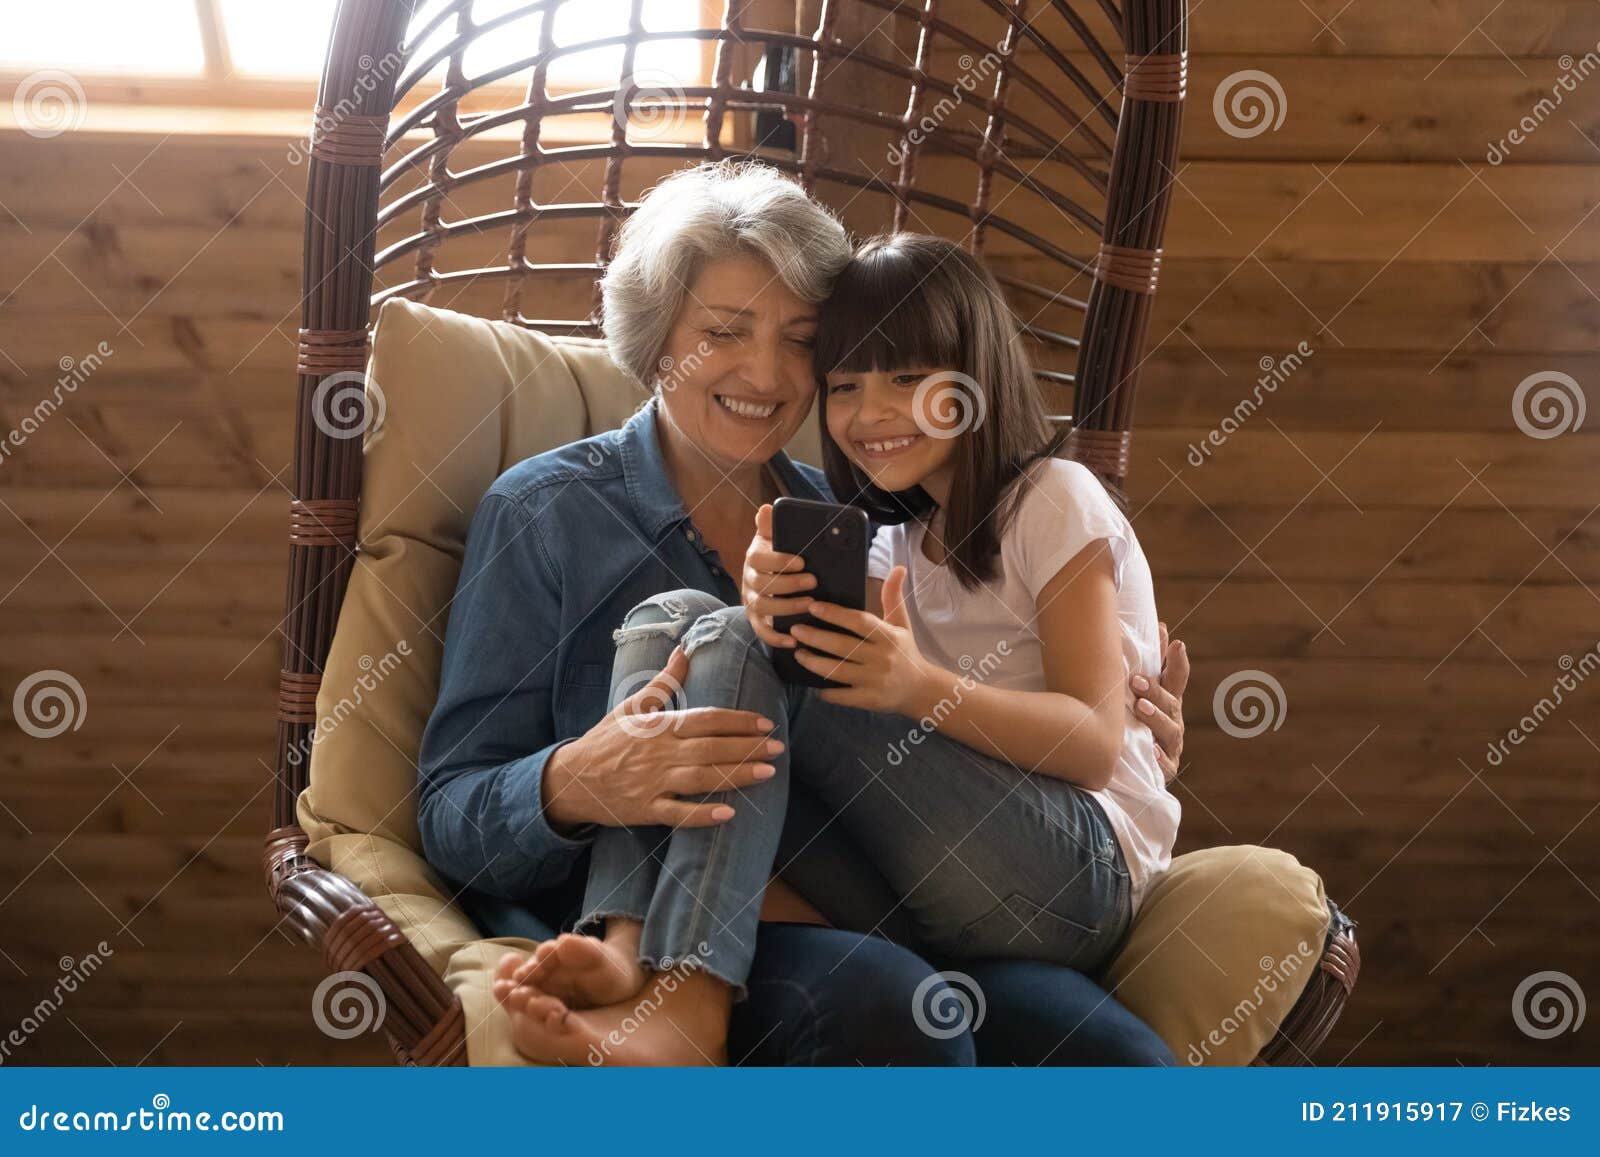 happy senior grandmother and granddaughter use smartphone laughing